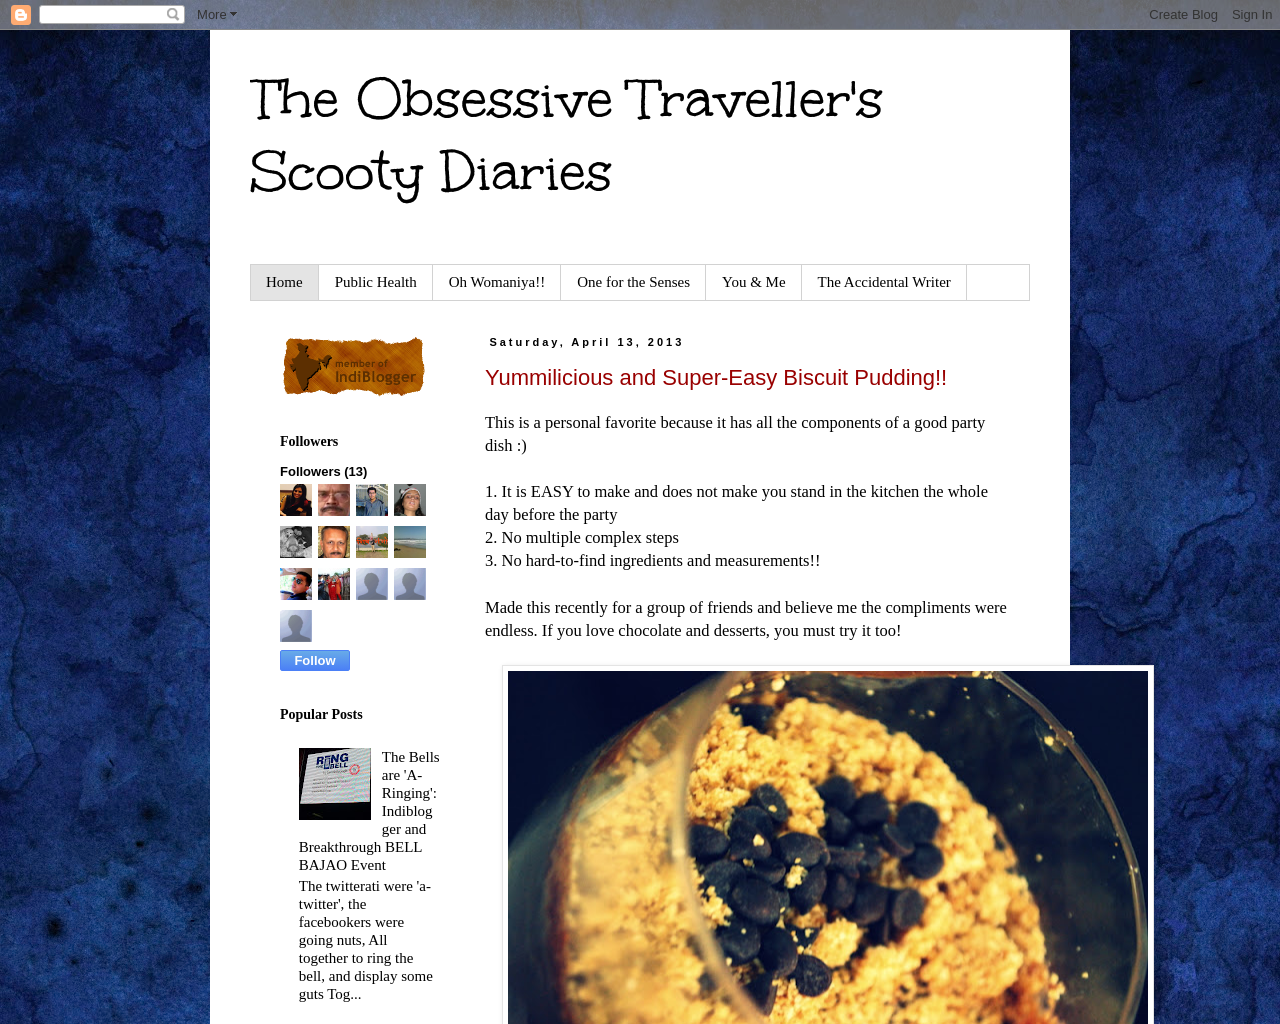 The Obsessive Traveller's Scooty Diaries